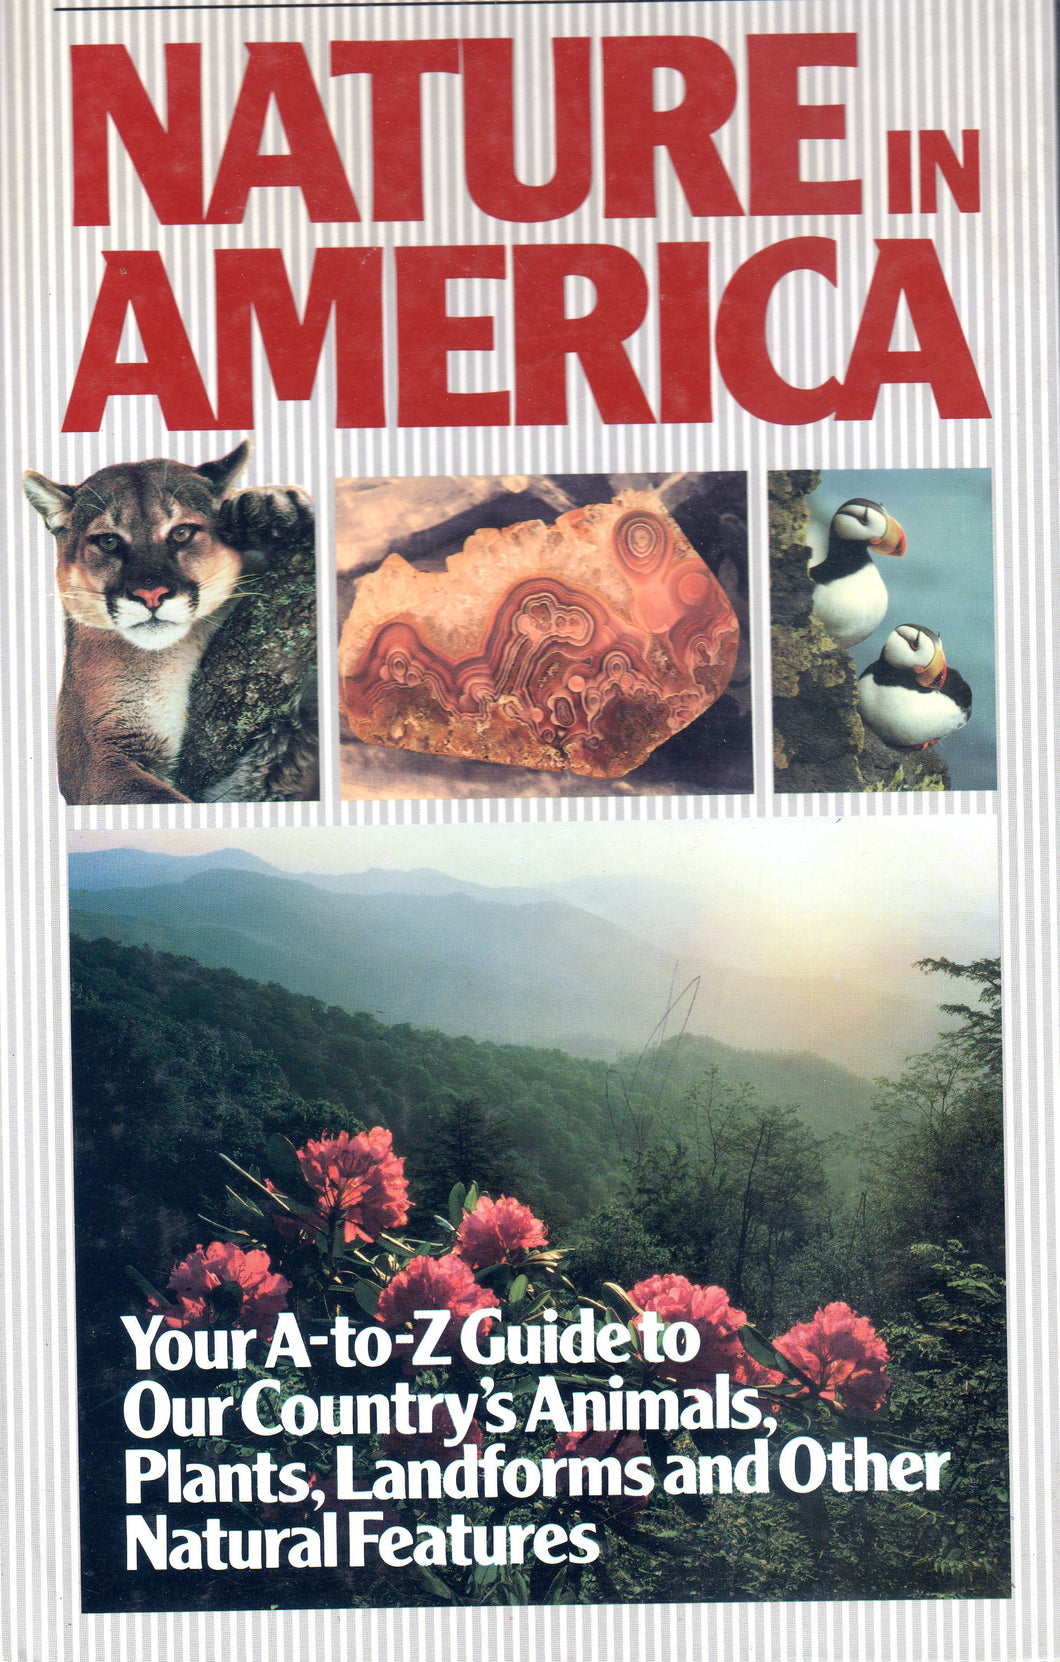 Nature in America by Reader's Digest (Used like new)